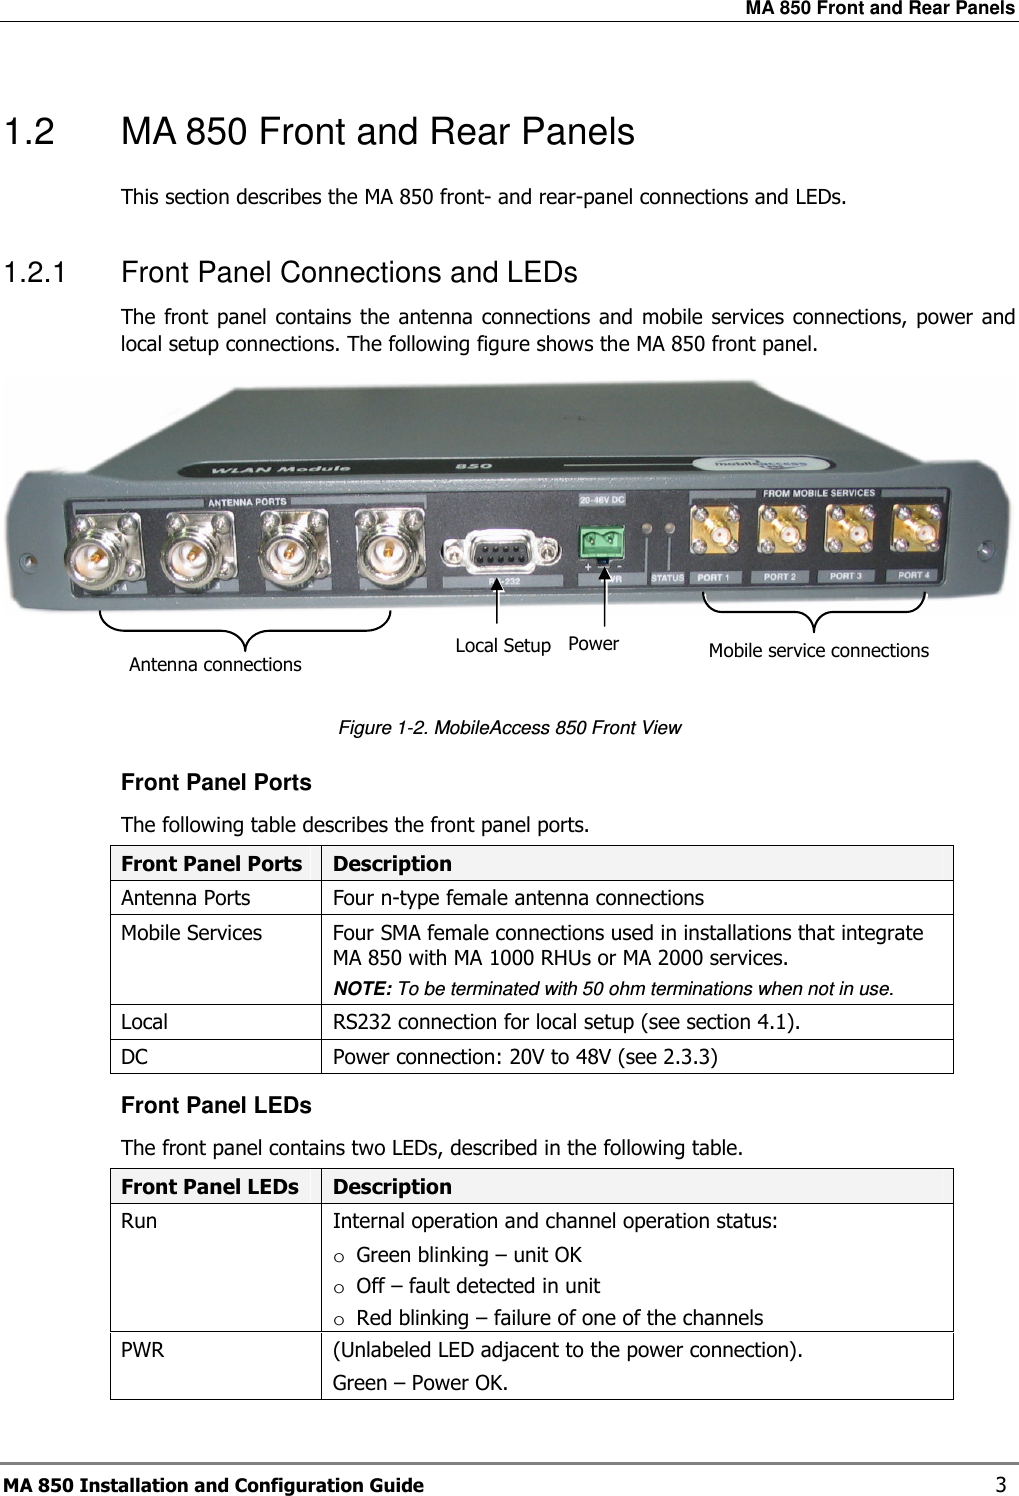 MA 850 Front and Rear Panels MA 850 Installation and Configuration Guide    3 1.2  MA 850 Front and Rear Panels This section describes the MA 850 front- and rear-panel connections and LEDs. 1.2.1  Front Panel Connections and LEDs The front panel  contains  the antenna  connections and  mobile services connections, power  and local setup connections. The following figure shows the MA 850 front panel.    Figure  1-2. MobileAccess 850 Front View Front Panel Ports The following table describes the front panel ports. Front Panel Ports  Description Antenna Ports  Four n-type female antenna connections Mobile Services  Four SMA female connections used in installations that integrate MA 850 with MA 1000 RHUs or MA 2000 services.  NOTE: To be terminated with 50 ohm terminations when not in use. Local  RS232 connection for local setup (see section  4.1).  DC  Power connection: 20V to 48V (see  2.3.3) Front Panel LEDs The front panel contains two LEDs, described in the following table.  Front Panel LEDs  Description Run  Internal operation and channel operation status: o Green blinking – unit OK o Off – fault detected in unit o Red blinking – failure of one of the channels  PWR  (Unlabeled LED adjacent to the power connection).  Green – Power OK.  Mobile service connections Antenna connections Power Local Setup  